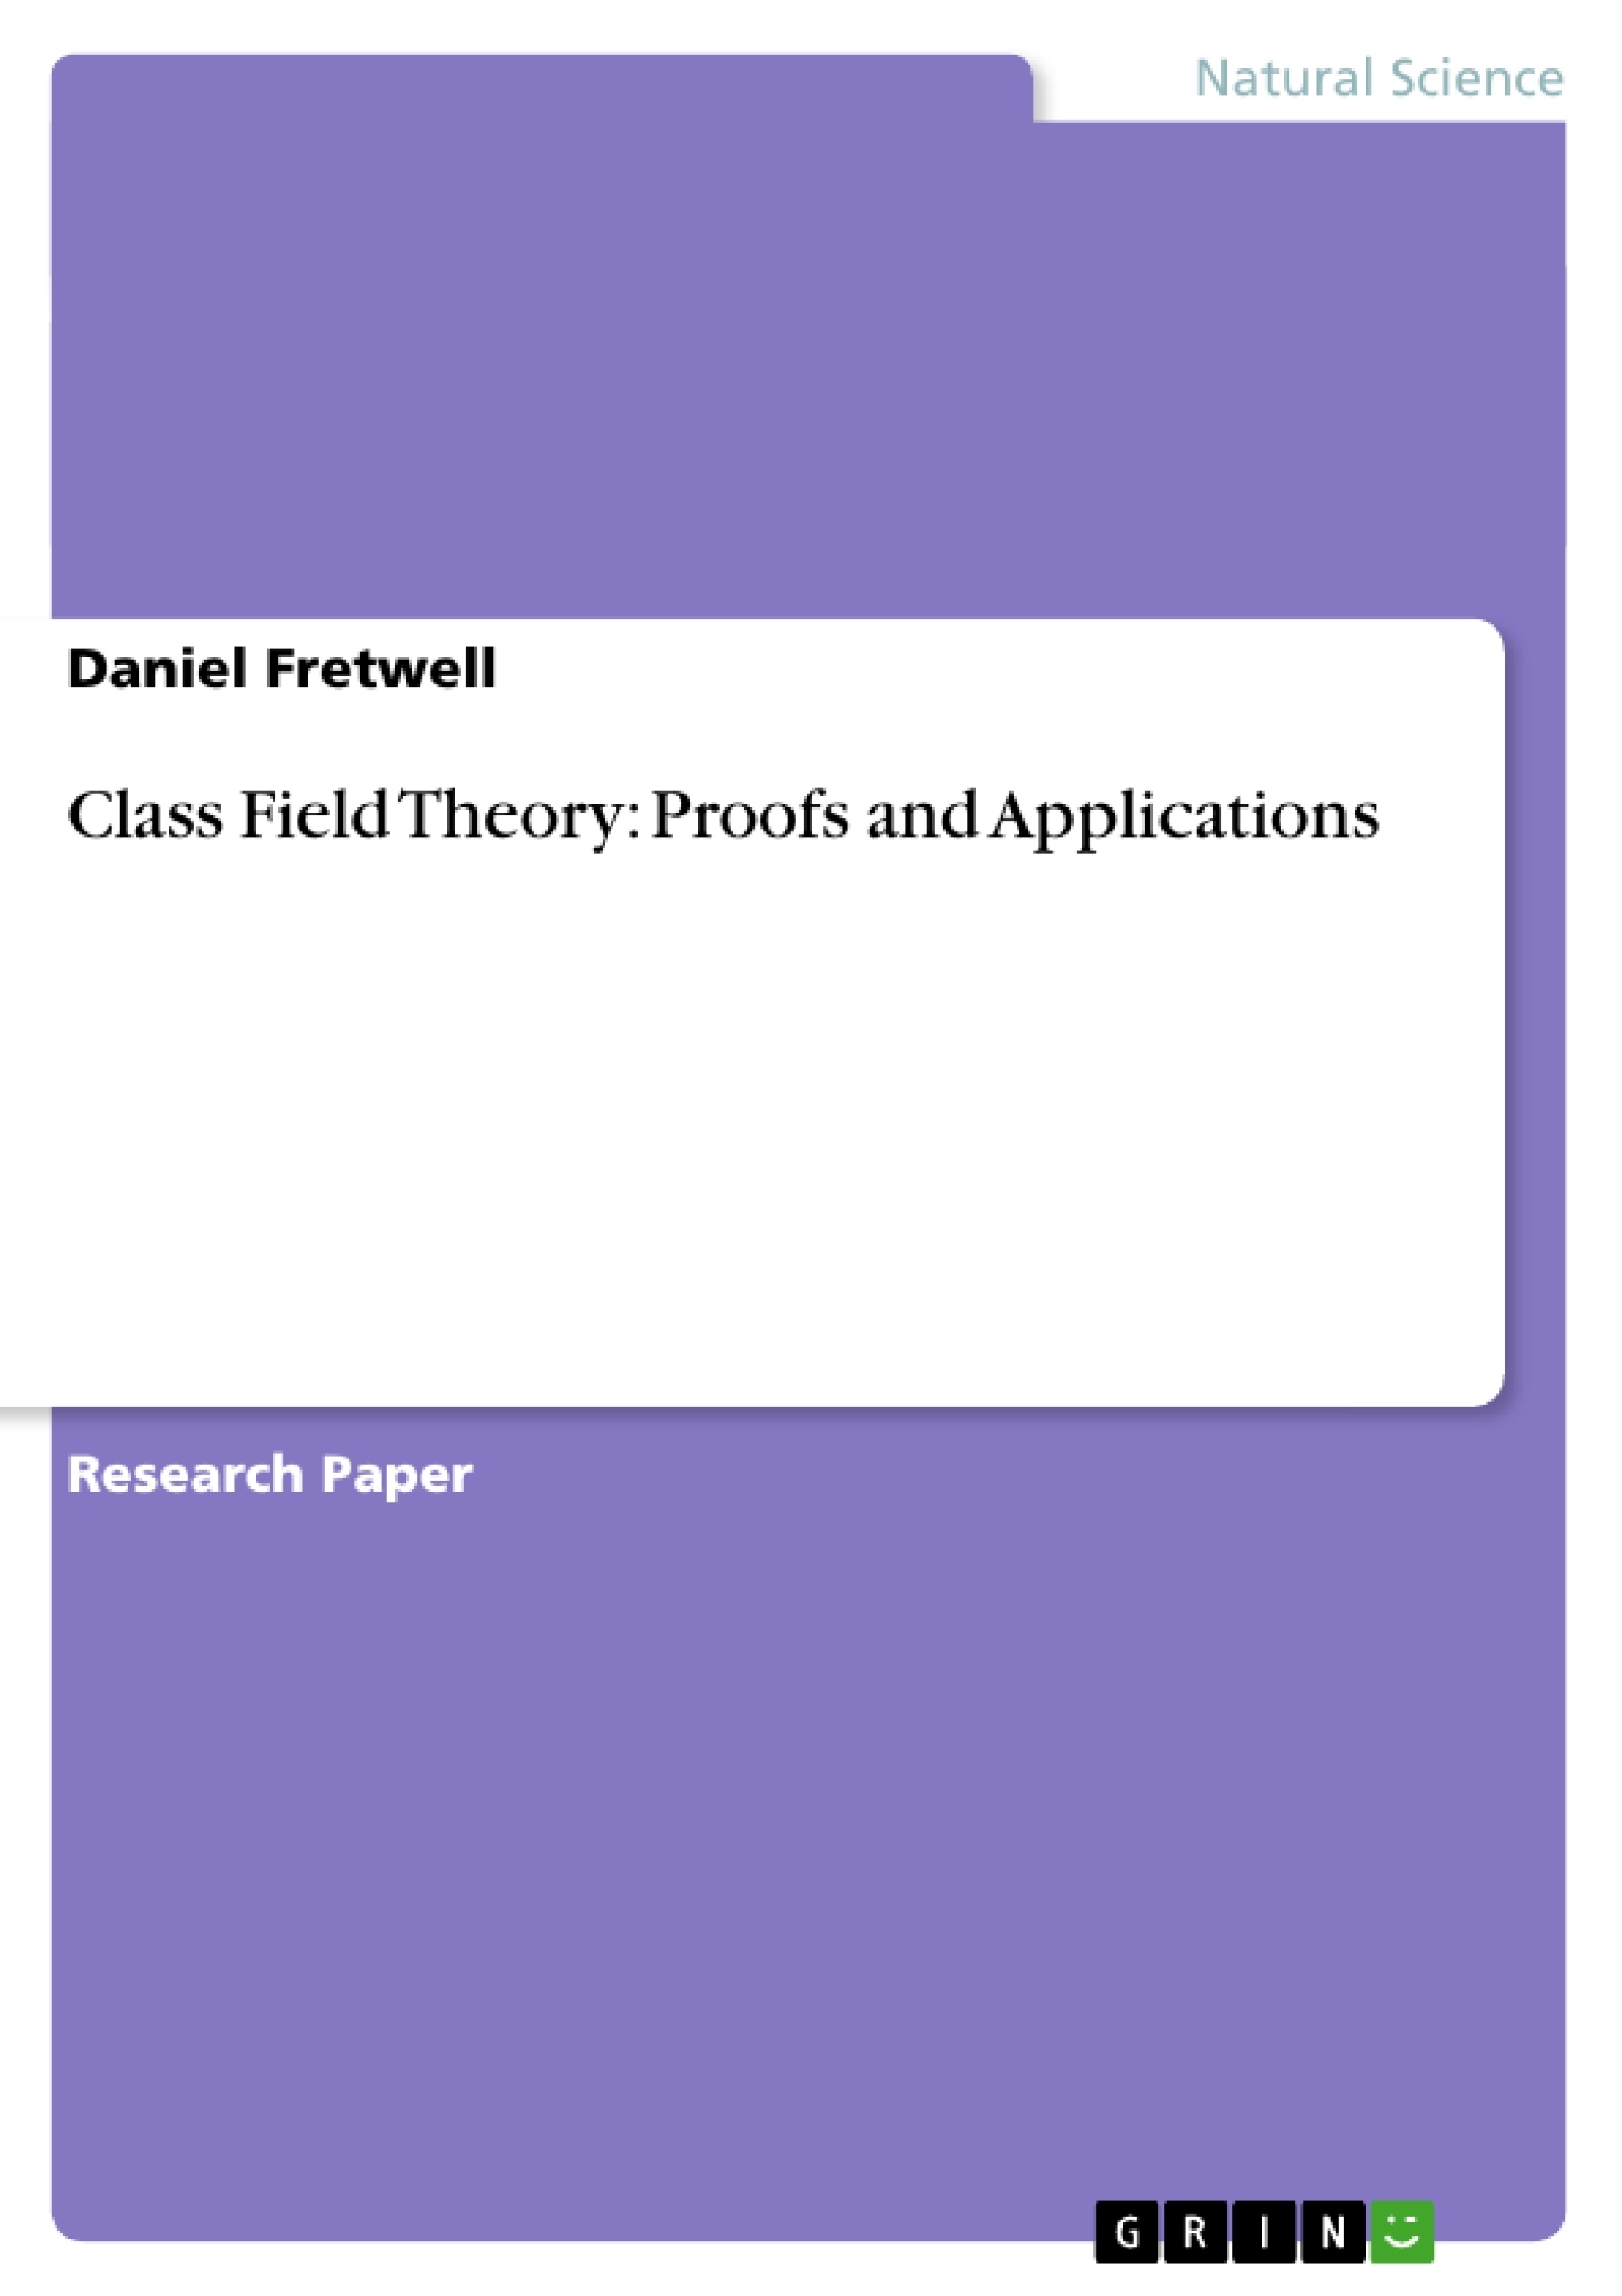 Title: Class Field Theory: Proofs and Applications